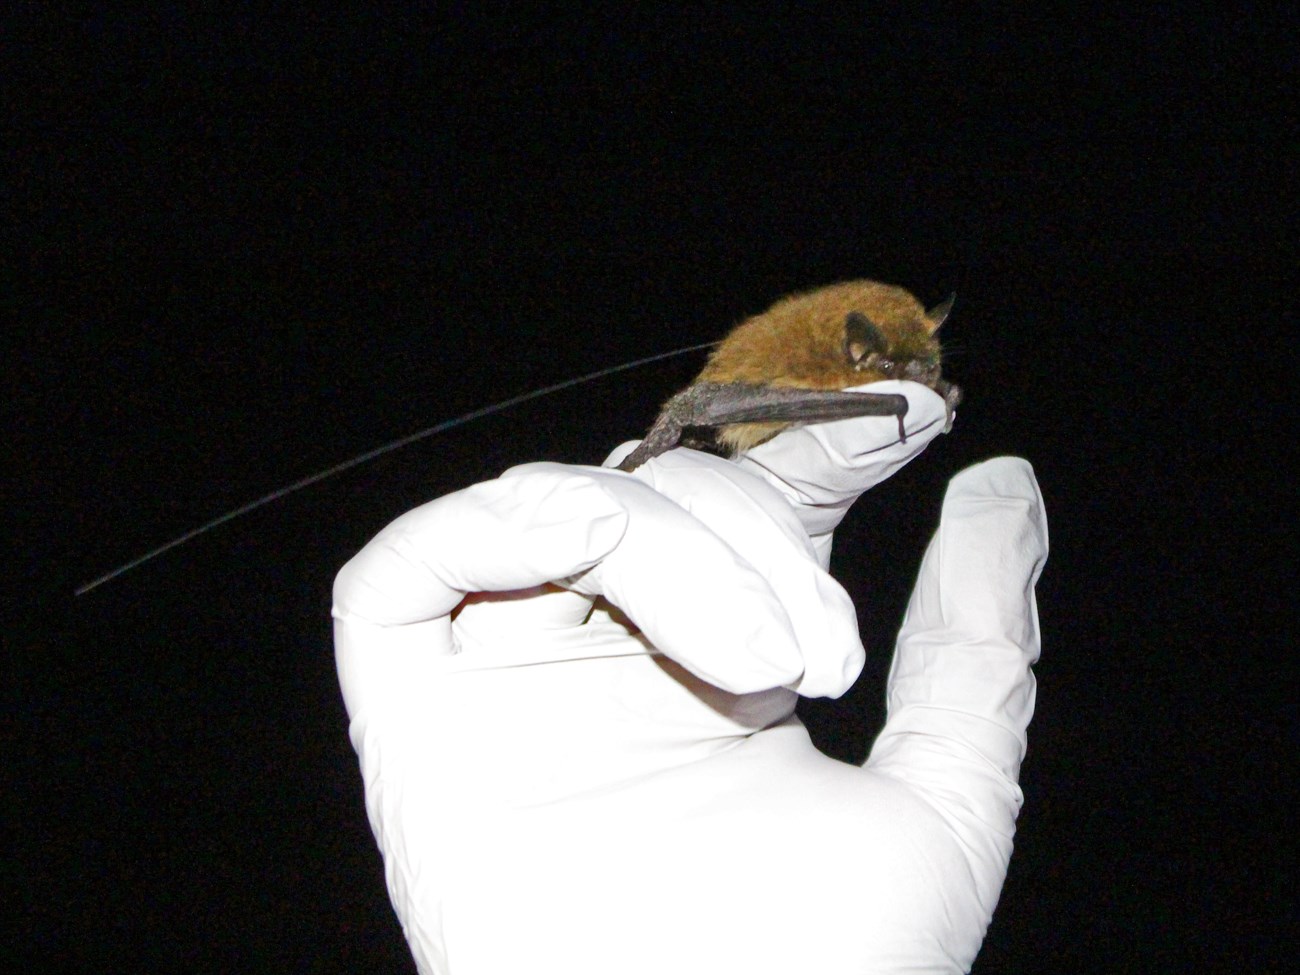 Bat with a temporary radio transmitter attached to its back.